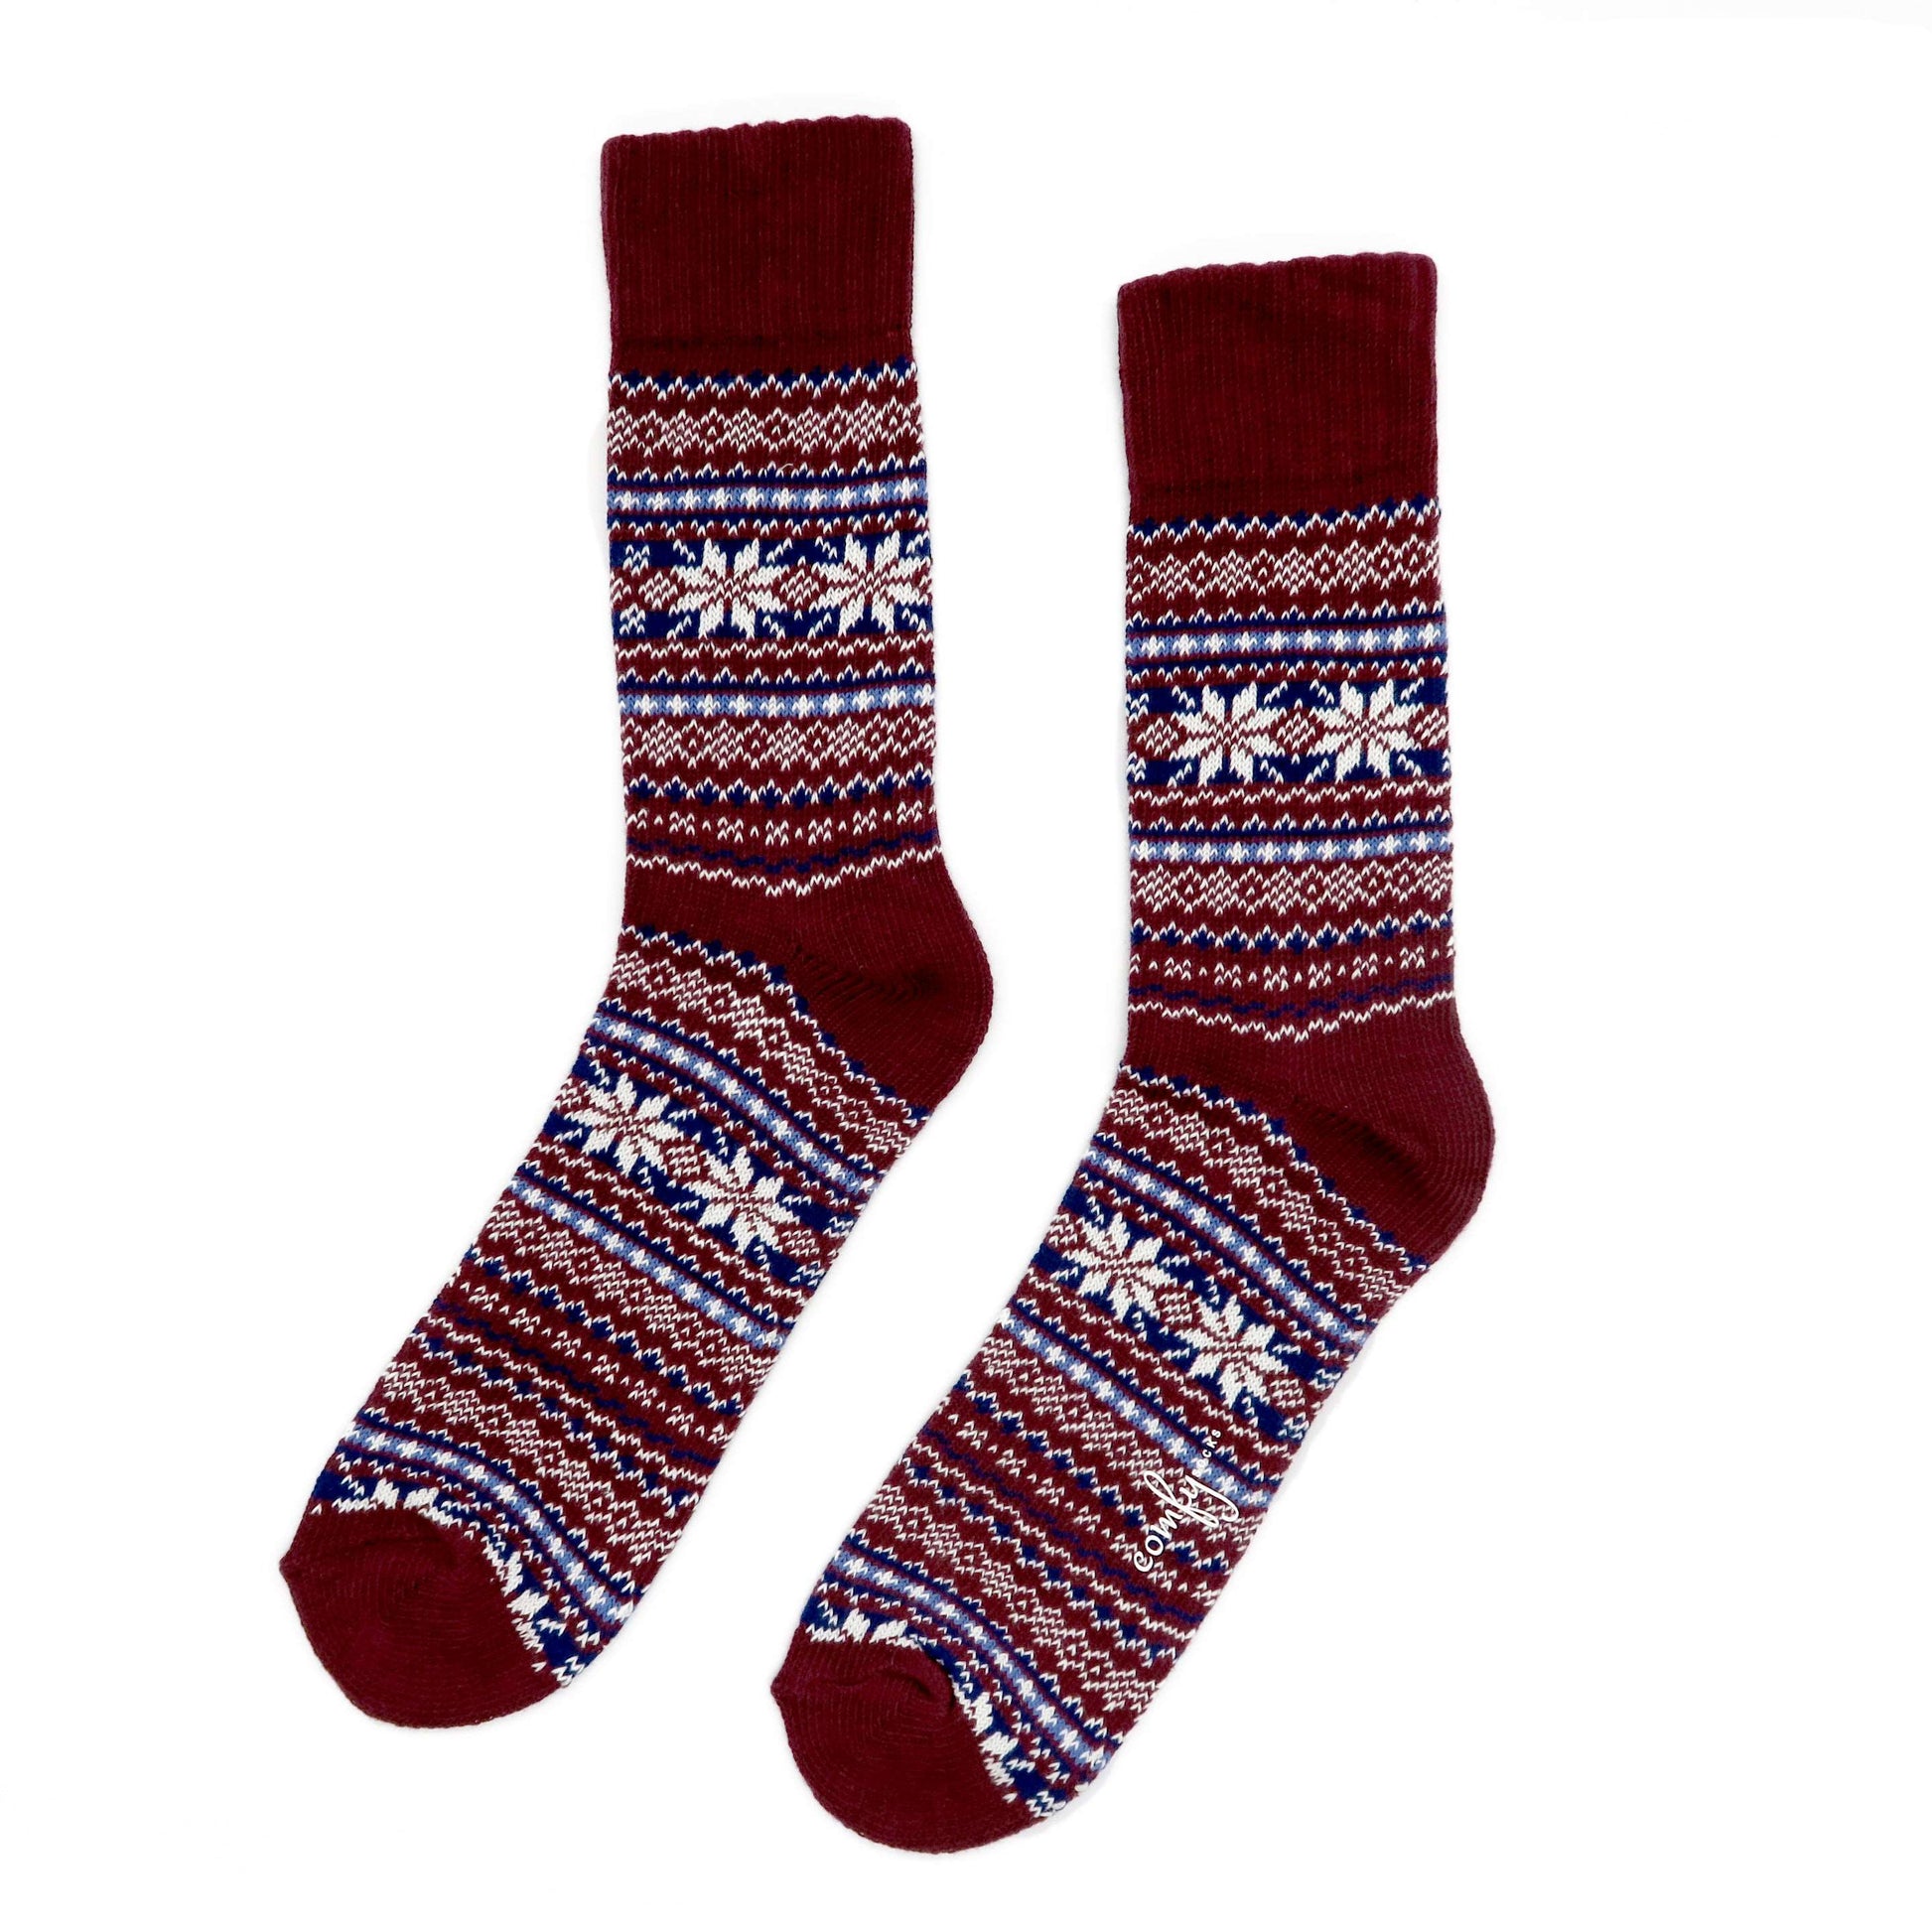 nordic sock - snowflake pattern in red color